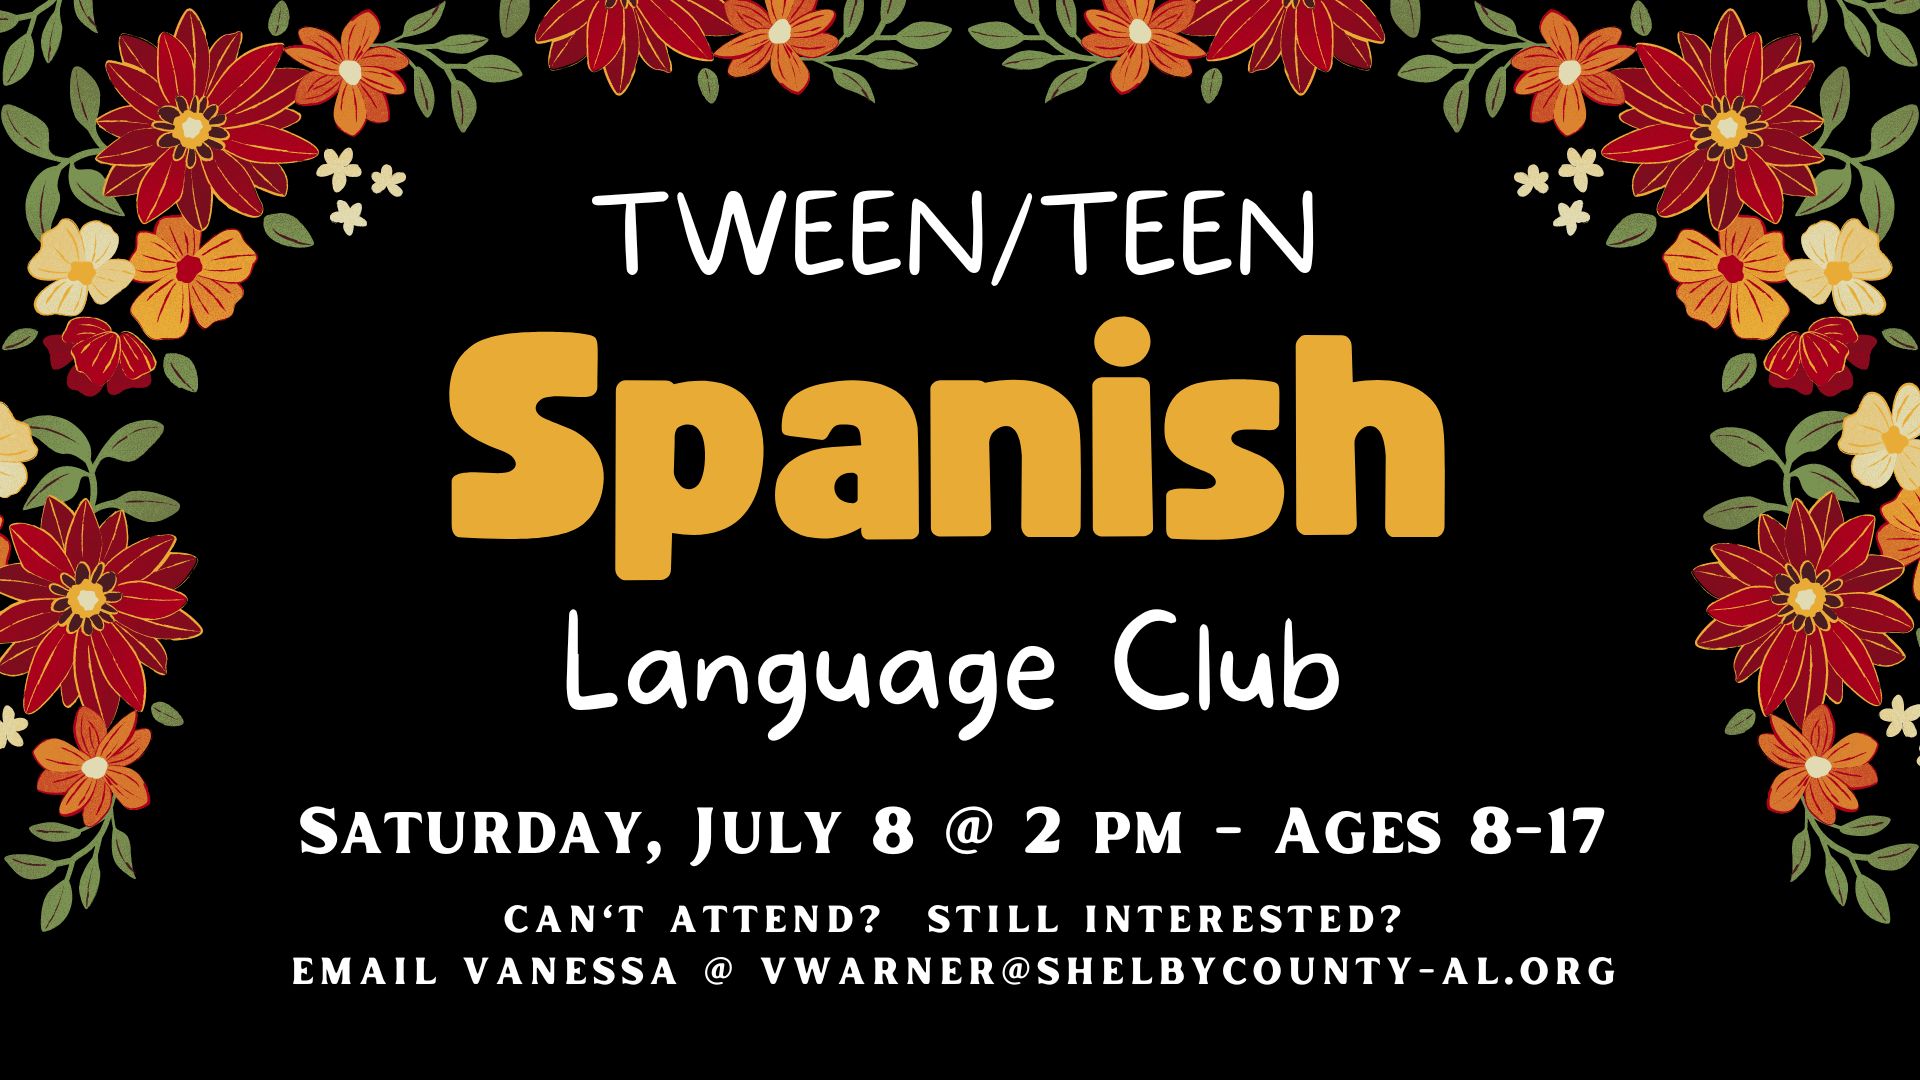 Graphic of flowers.   Text reads Ages 8-12  Tween/Teen  Spanish Language Club. Saturday July 8 at 2pm; Ages 8-17. Can't attend?  Still interested? email Vanessa @ vwarner@shelbycounty-al.org 